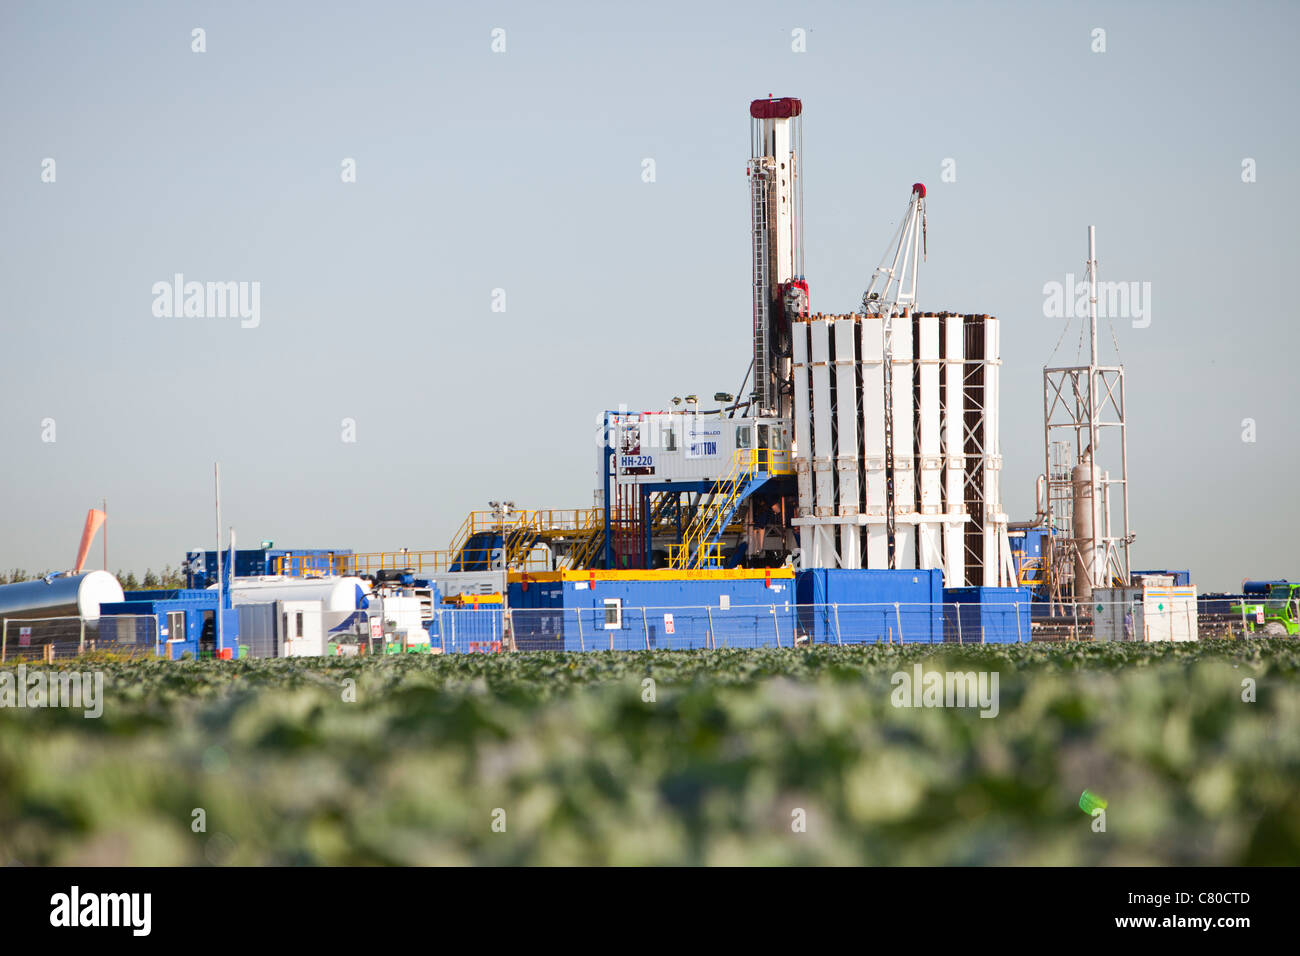 A test drilling site for shale gas near Banks on the outskirts of Southport, Lancashire, UK. Stock Photo